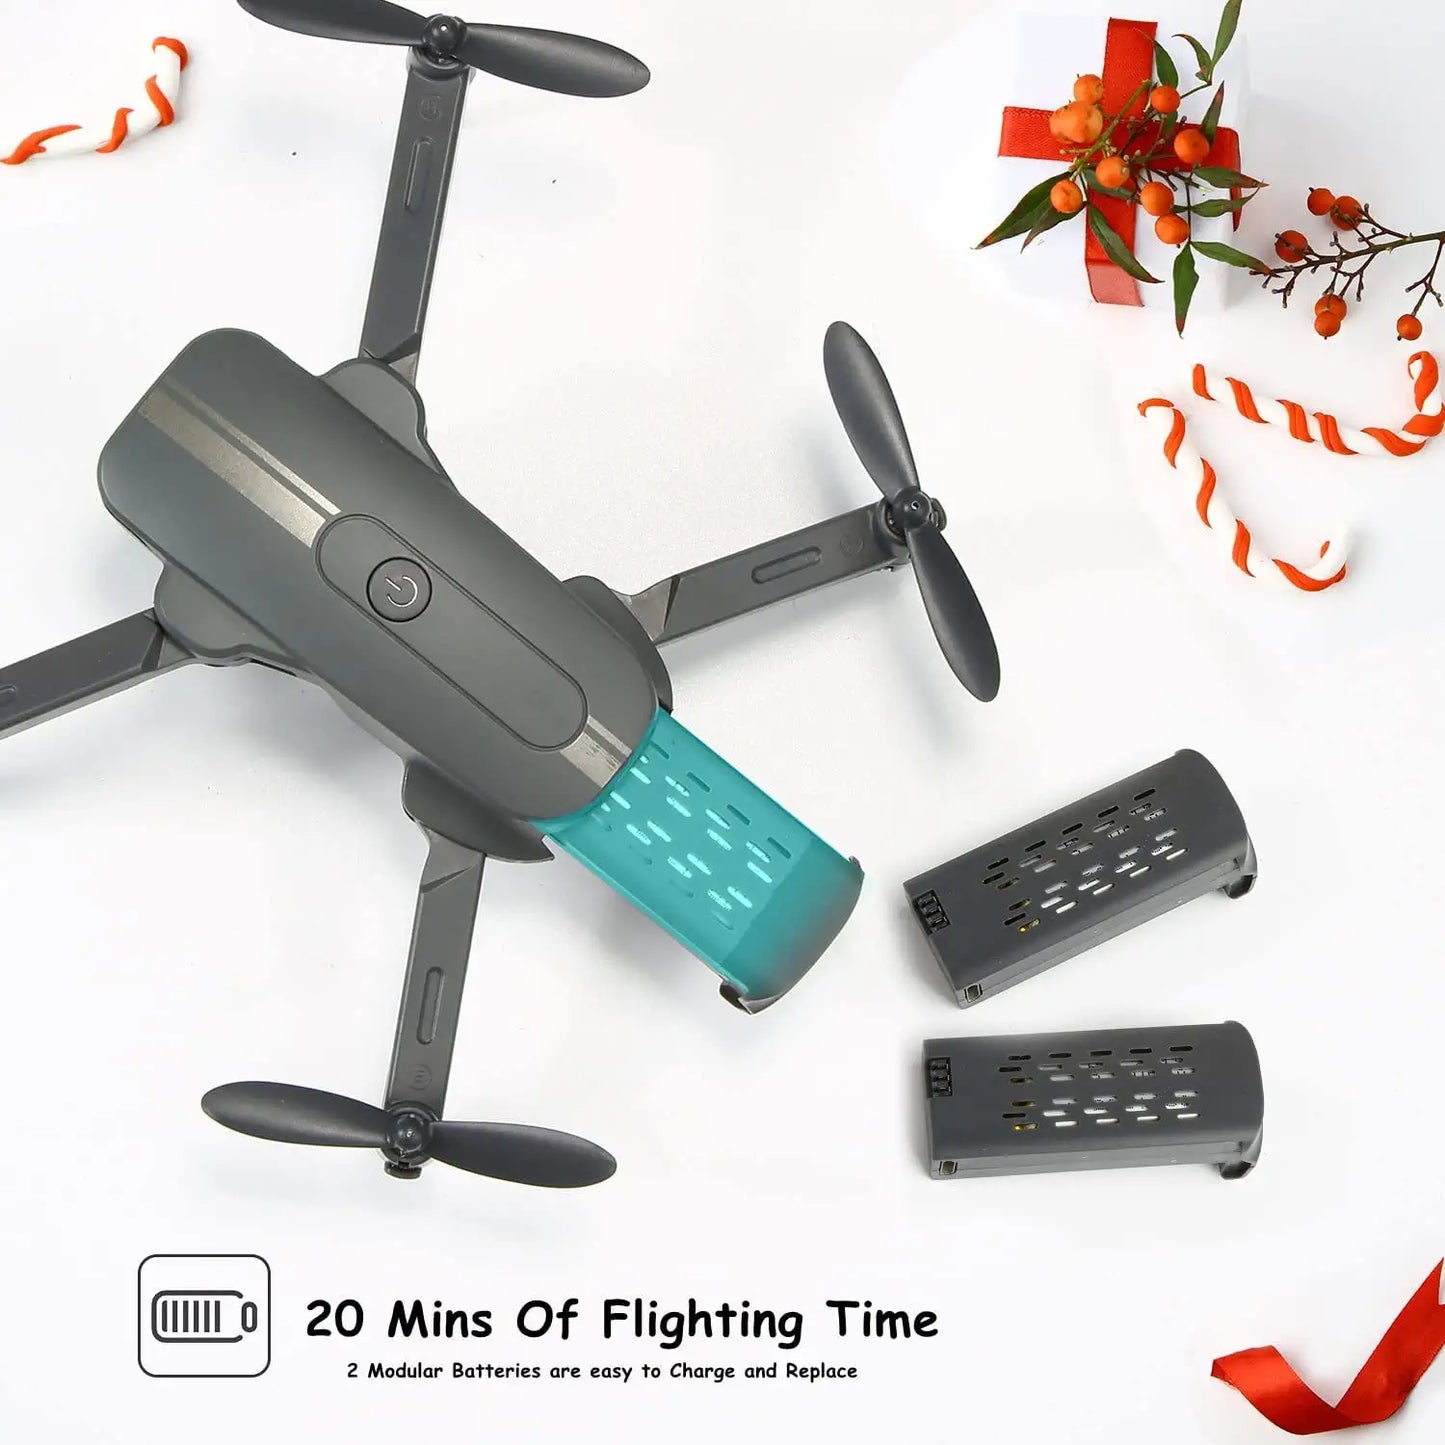 Zuhafa S17 Mini Drone - for Adults/Kids,720P HD FPV Camera,Altitude Hold, Headless Mode, One Key Start/Landing, Speed Adjustment, 3D Flips 2 Batteries, Remote Control Toys Gifts for Kids or Beginners - RCDrone